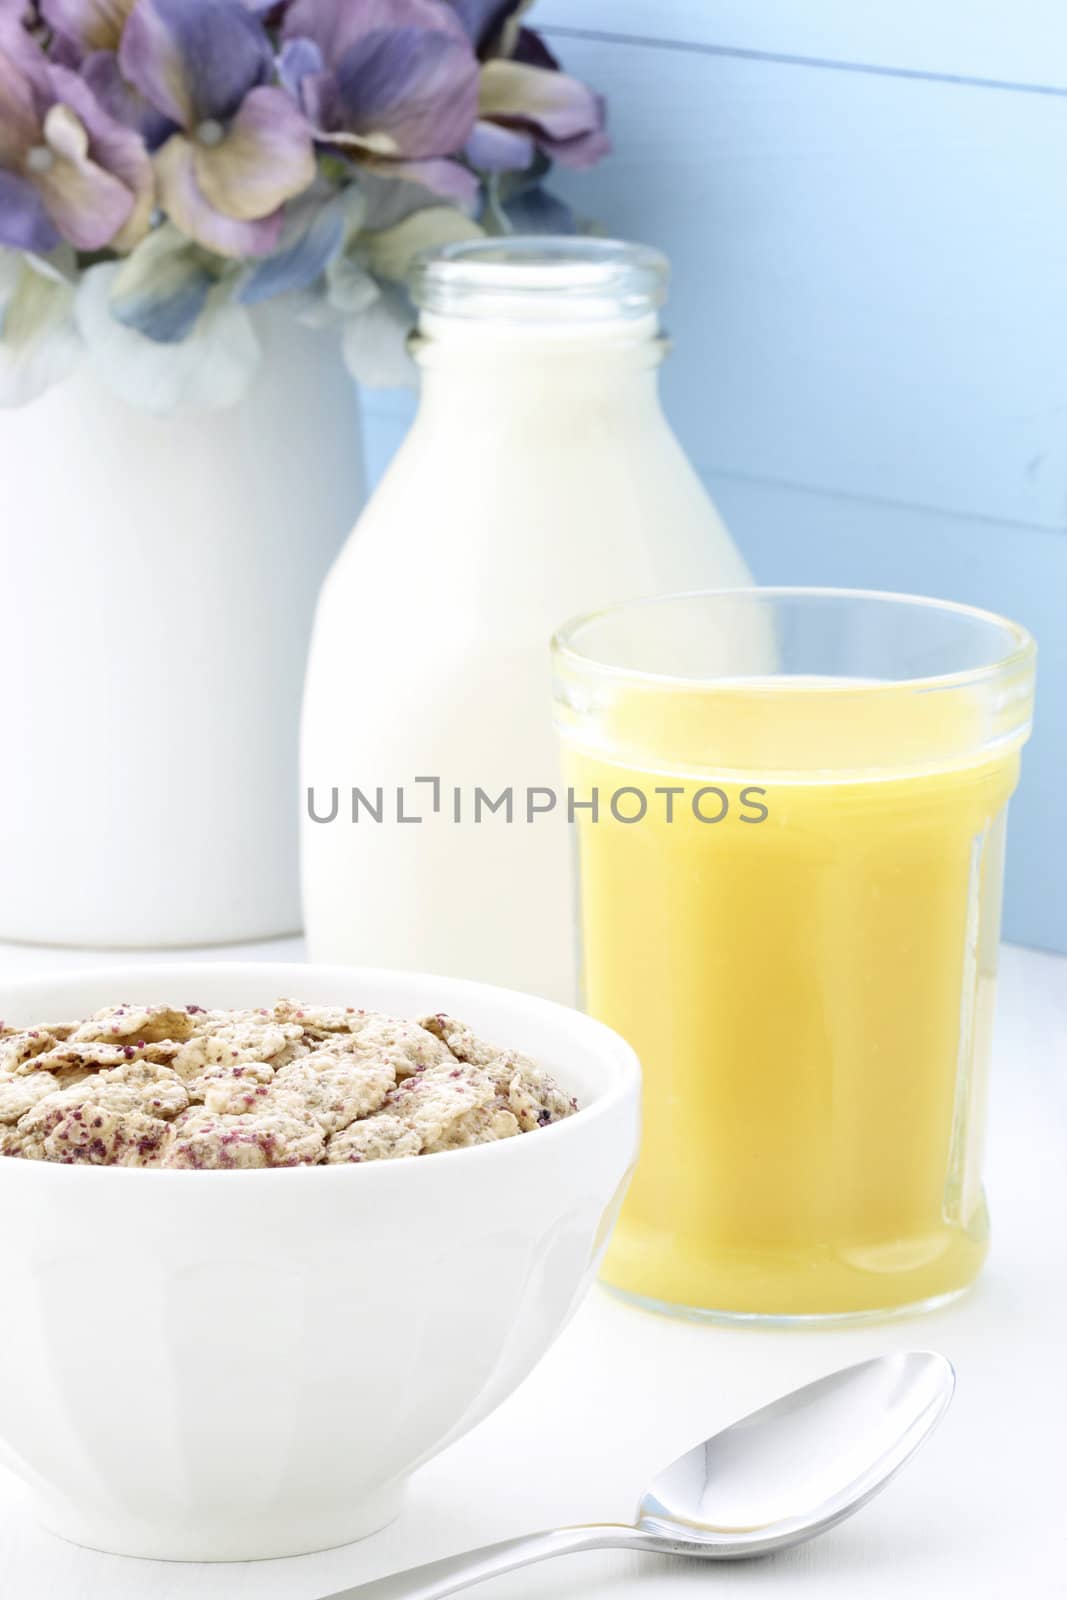 Delicious and healthy breakfast cereal with orange juice